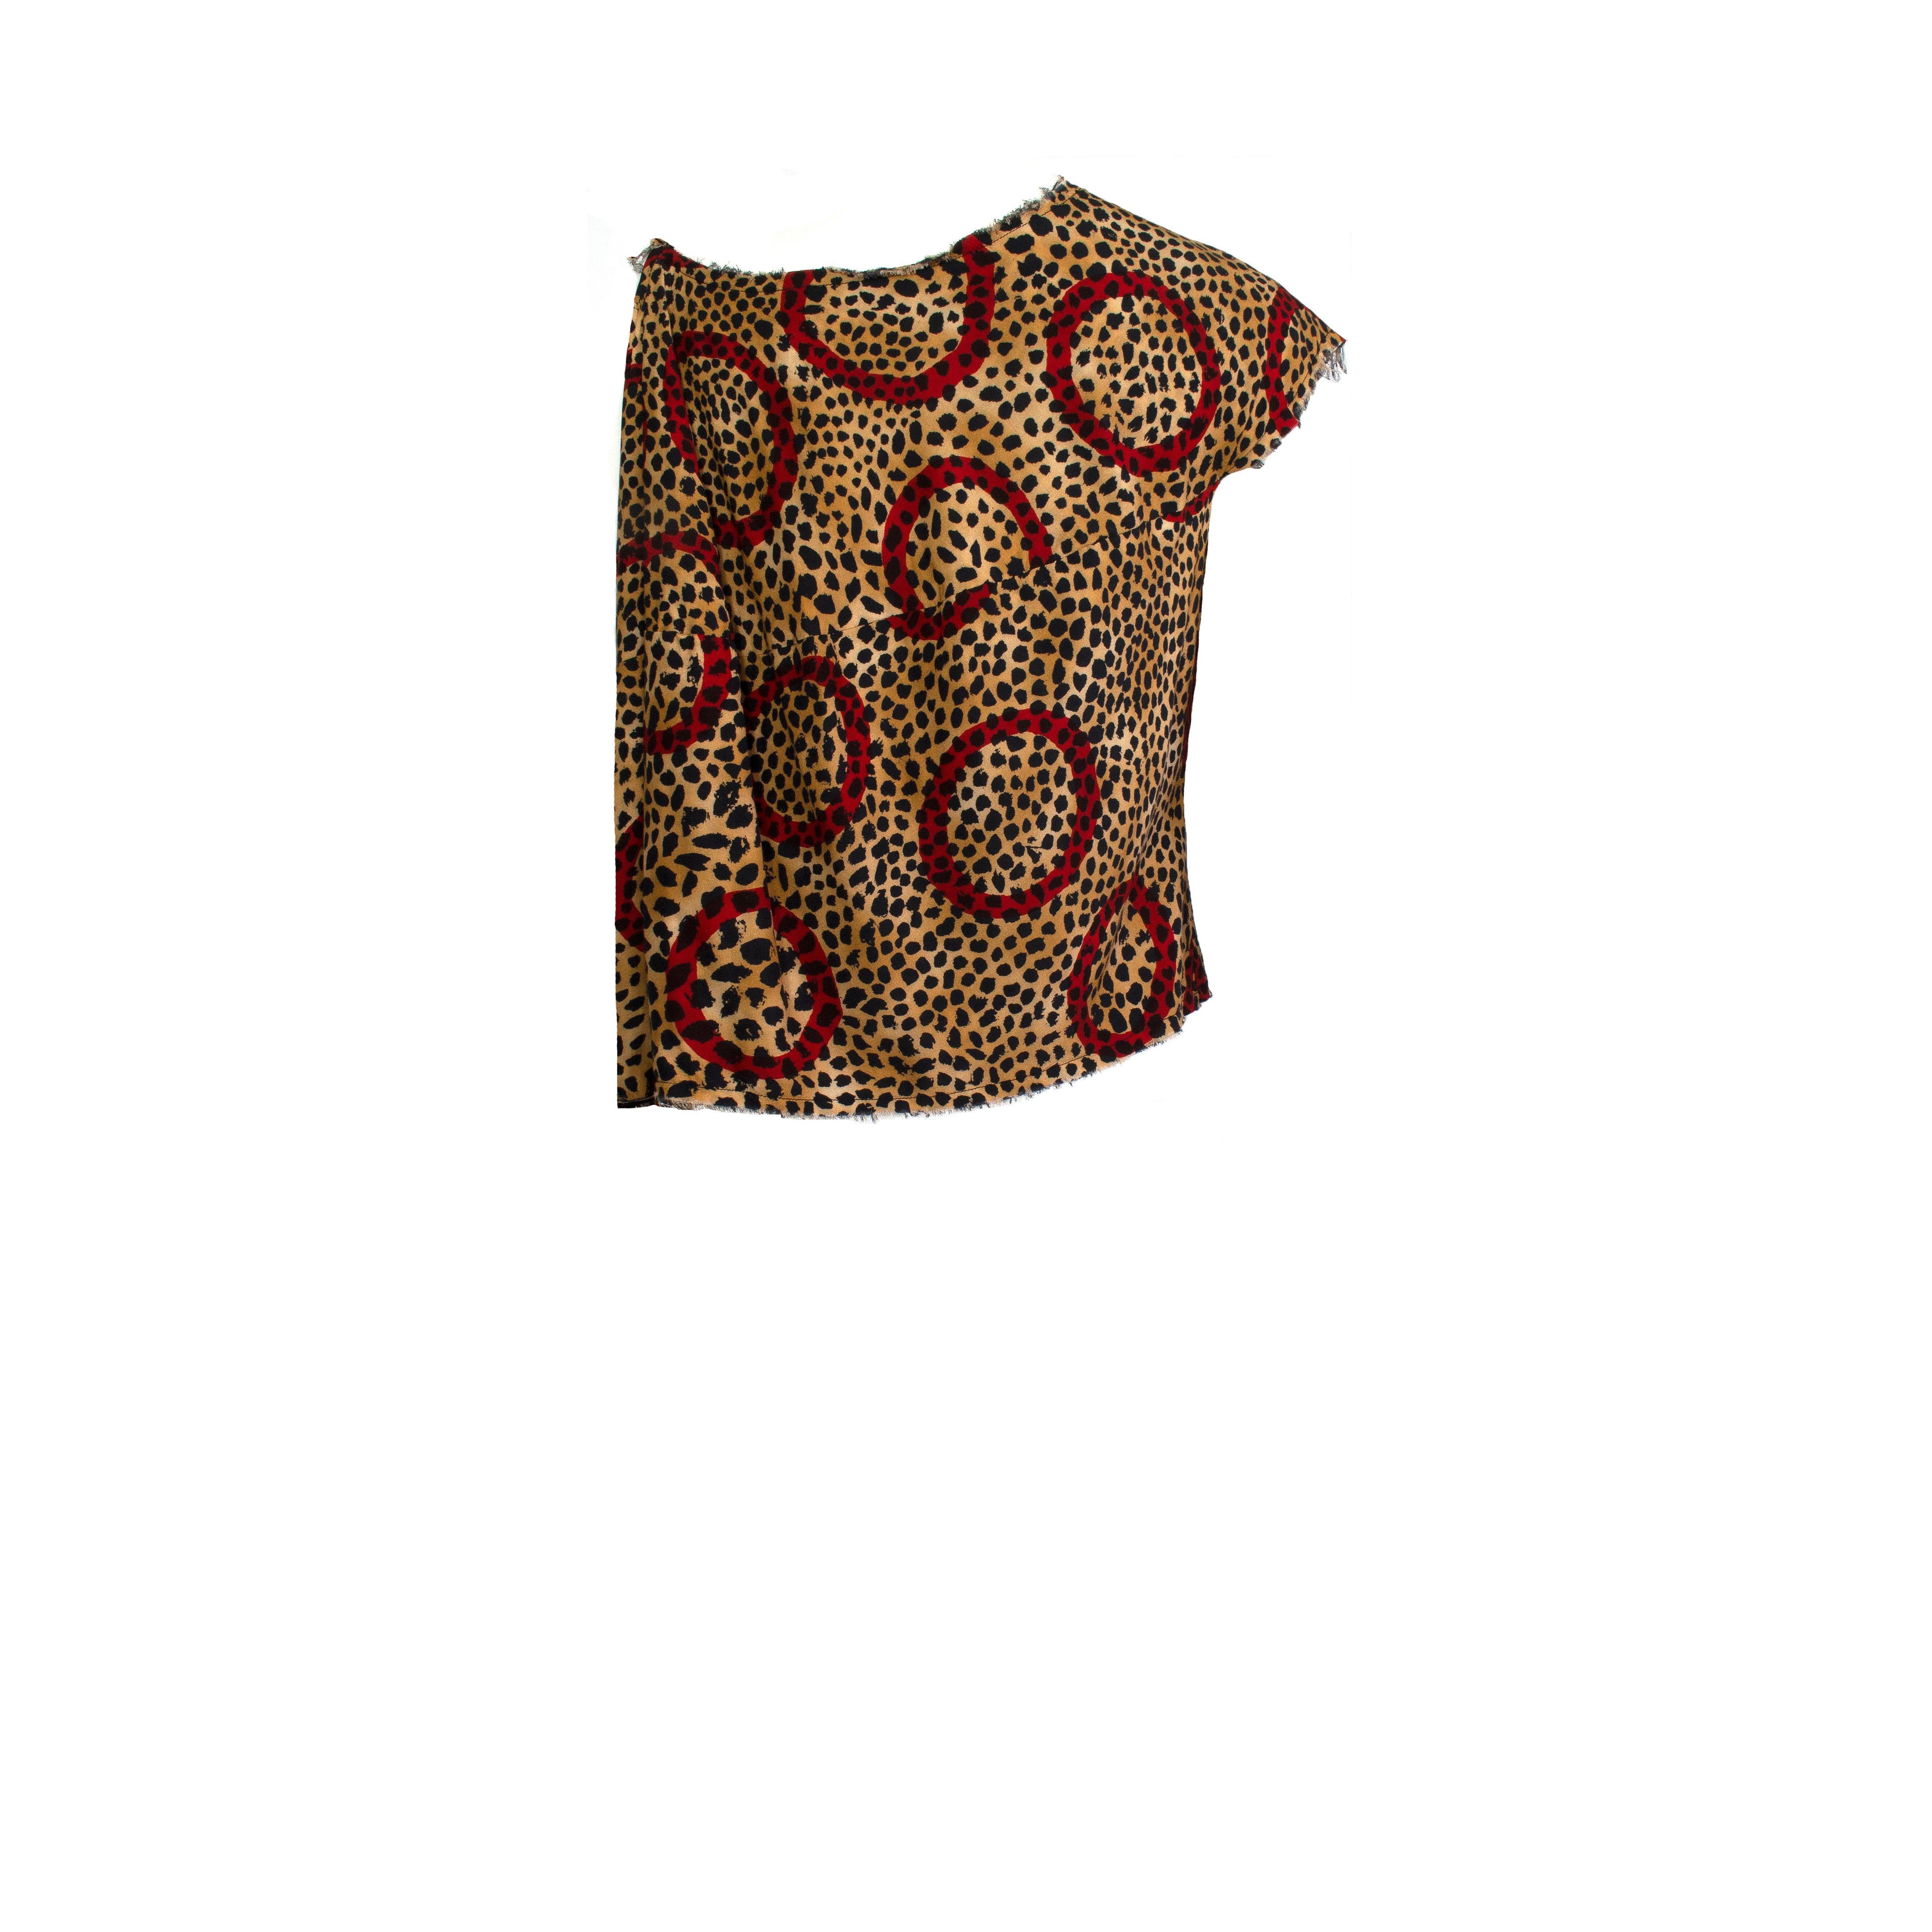 Product Details: Vivienne Westwood Anglomania - ‘Balloon Blouse’  - Leopard + Red Circular Print - Frayed Hem Detailing - Styled Loose or Tied - NEW With Tags - RRP £370
Label: Vivienne Westwood Anglomania
Fabric Content: Leopard Print Viscose
Size: